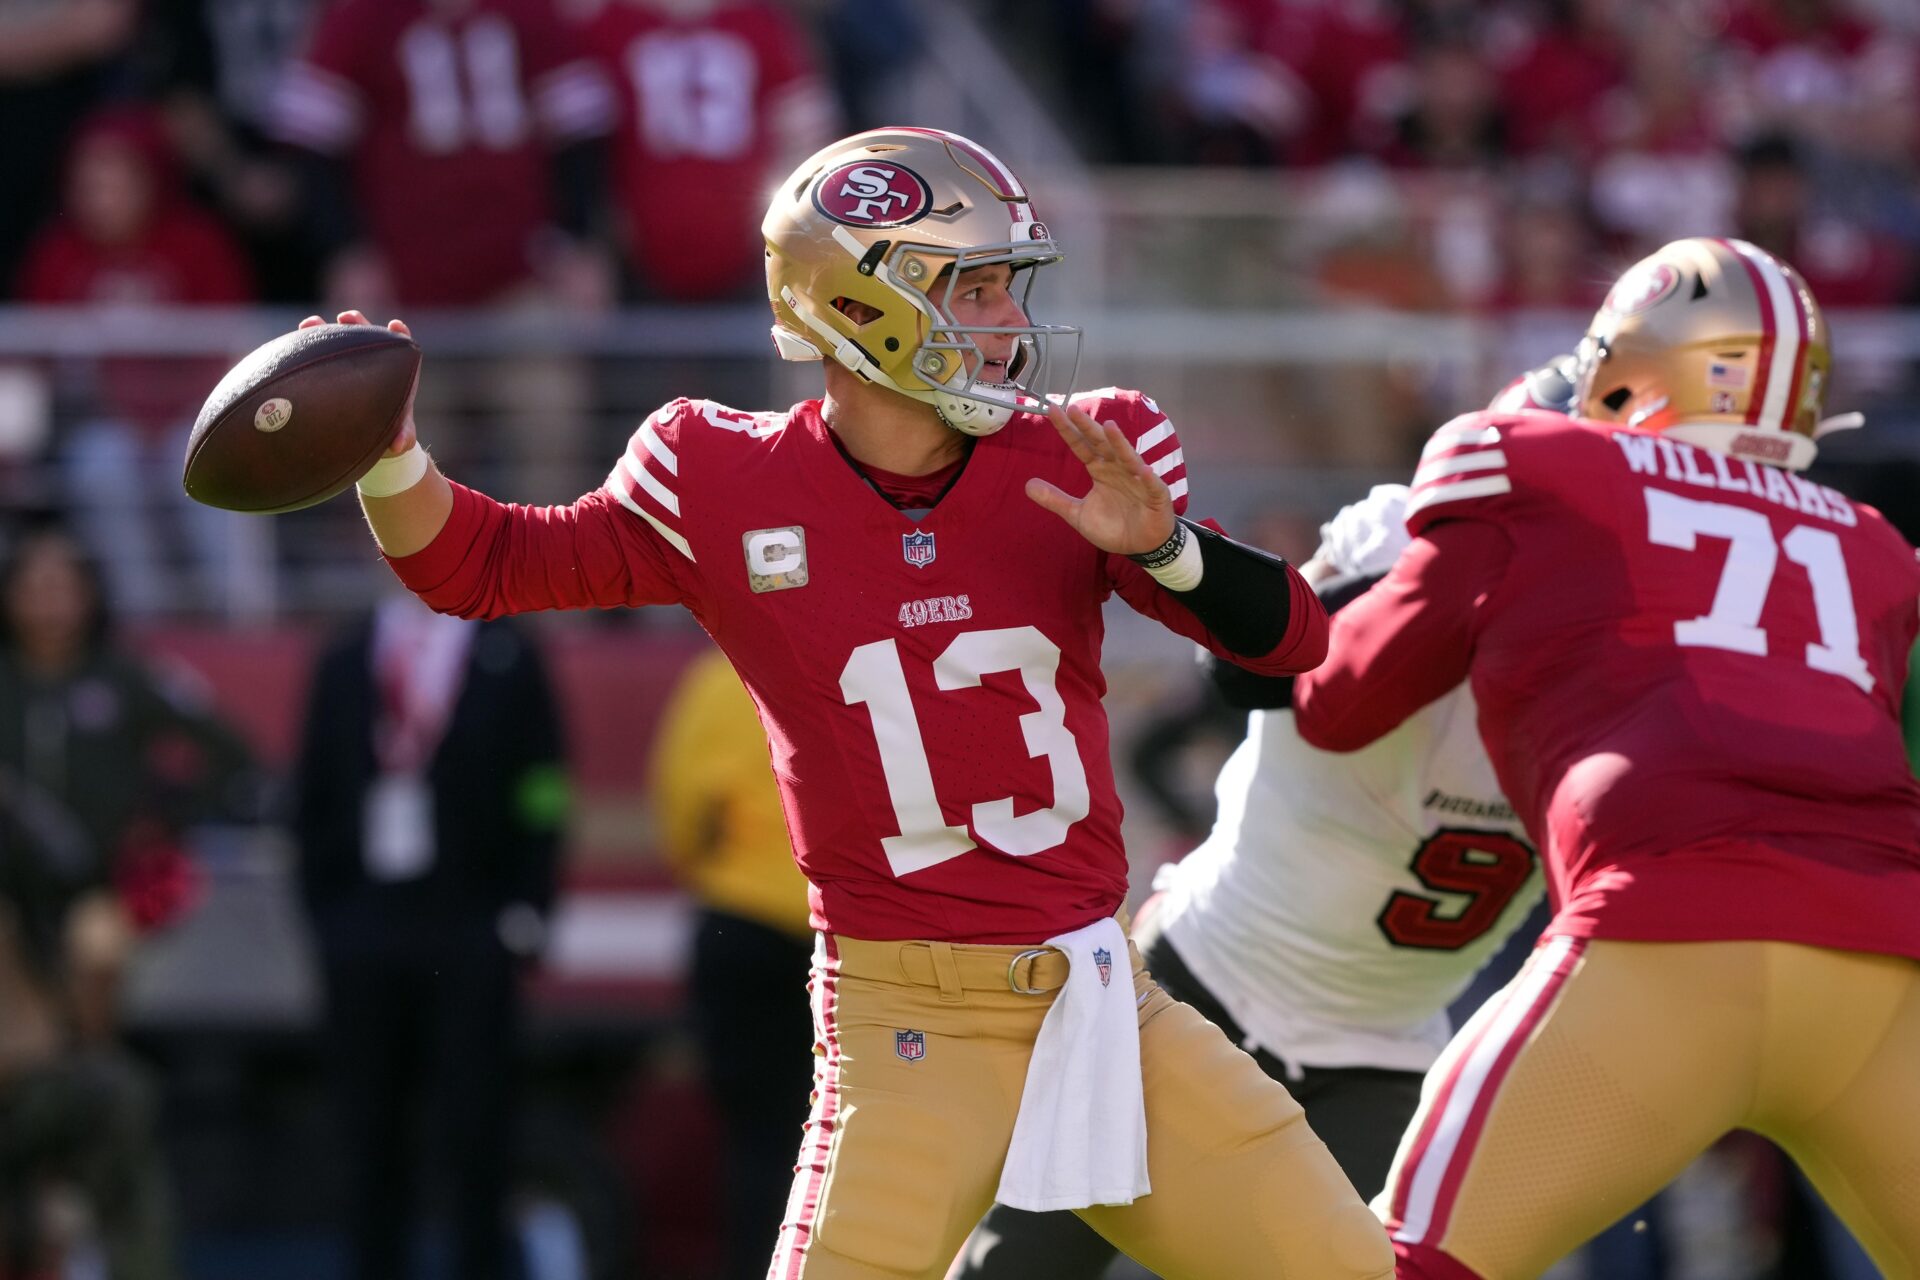 San Francisco 49ers QB Brock Purdy (13) throws a pass against the Tampa Bay Buccaneers.